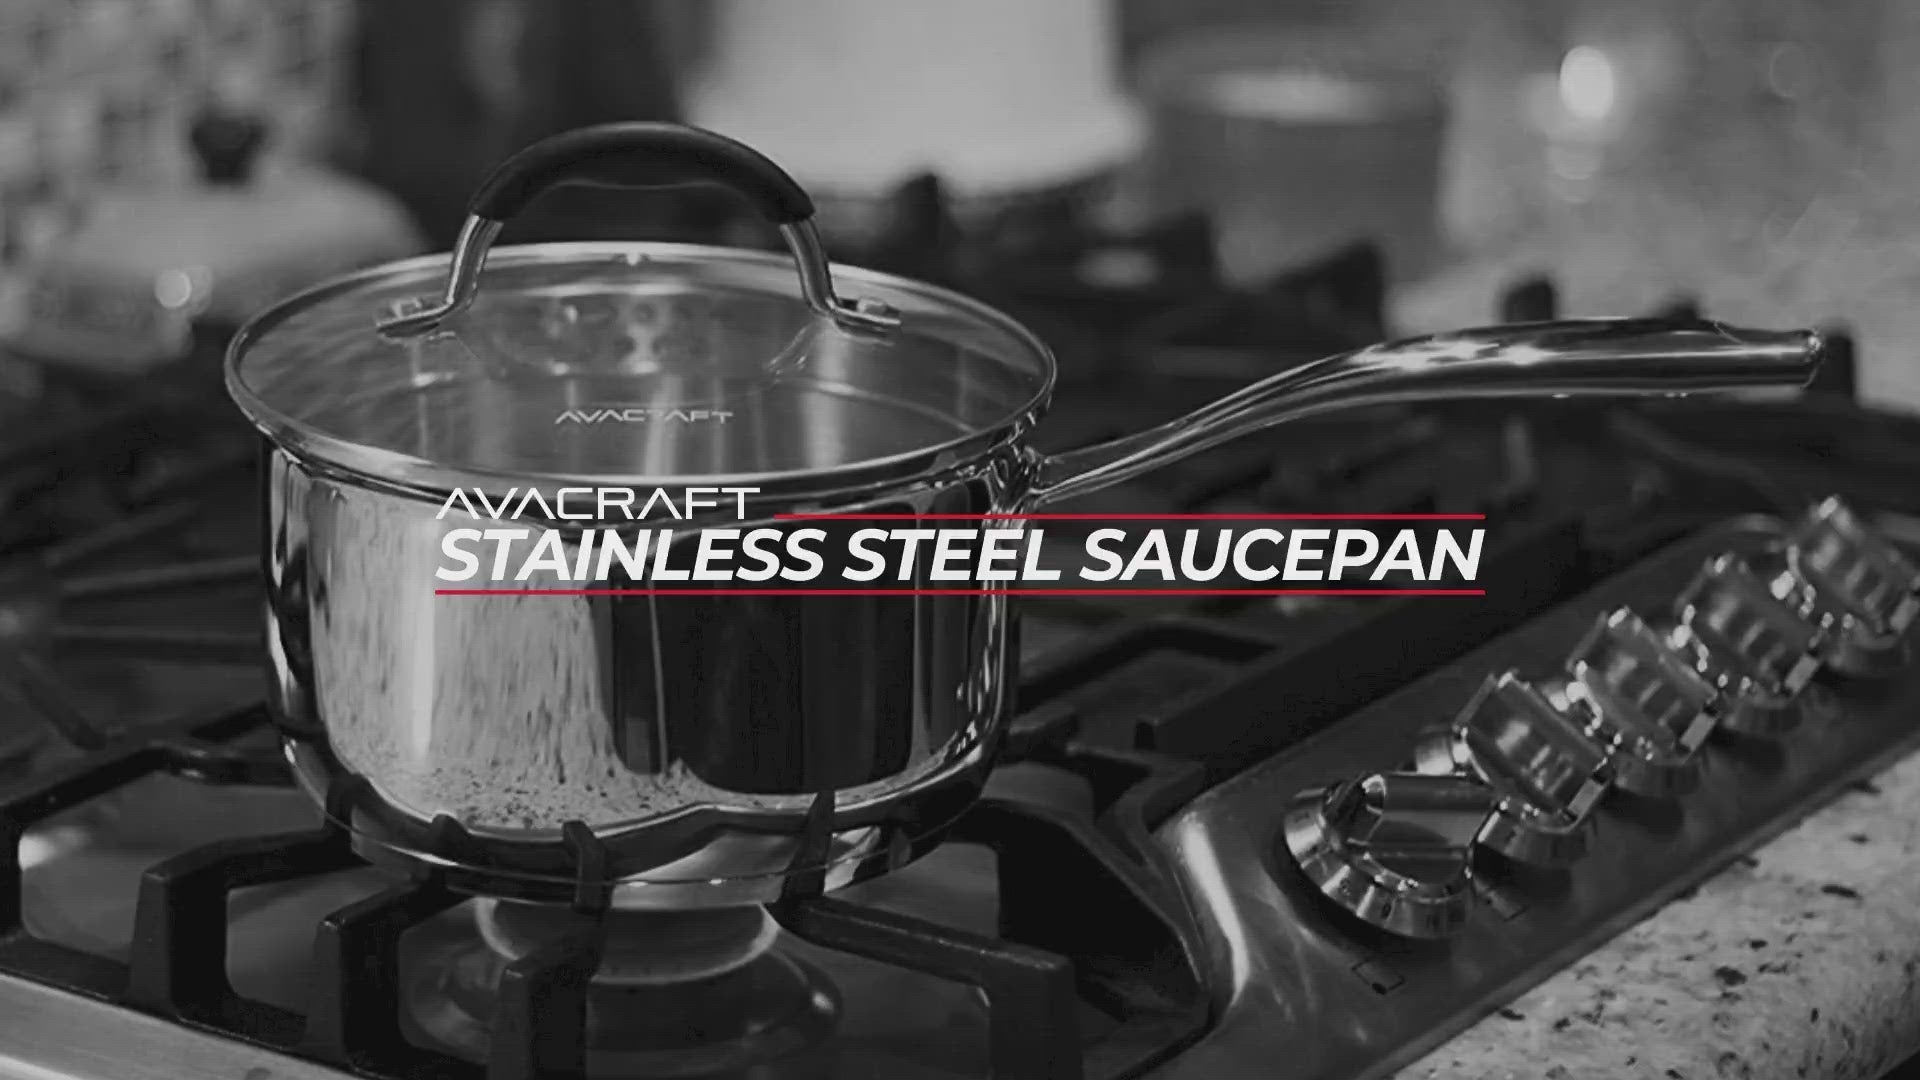 All Clad Stainless Steel Sauce Pan - 1.5 Quart with Lid